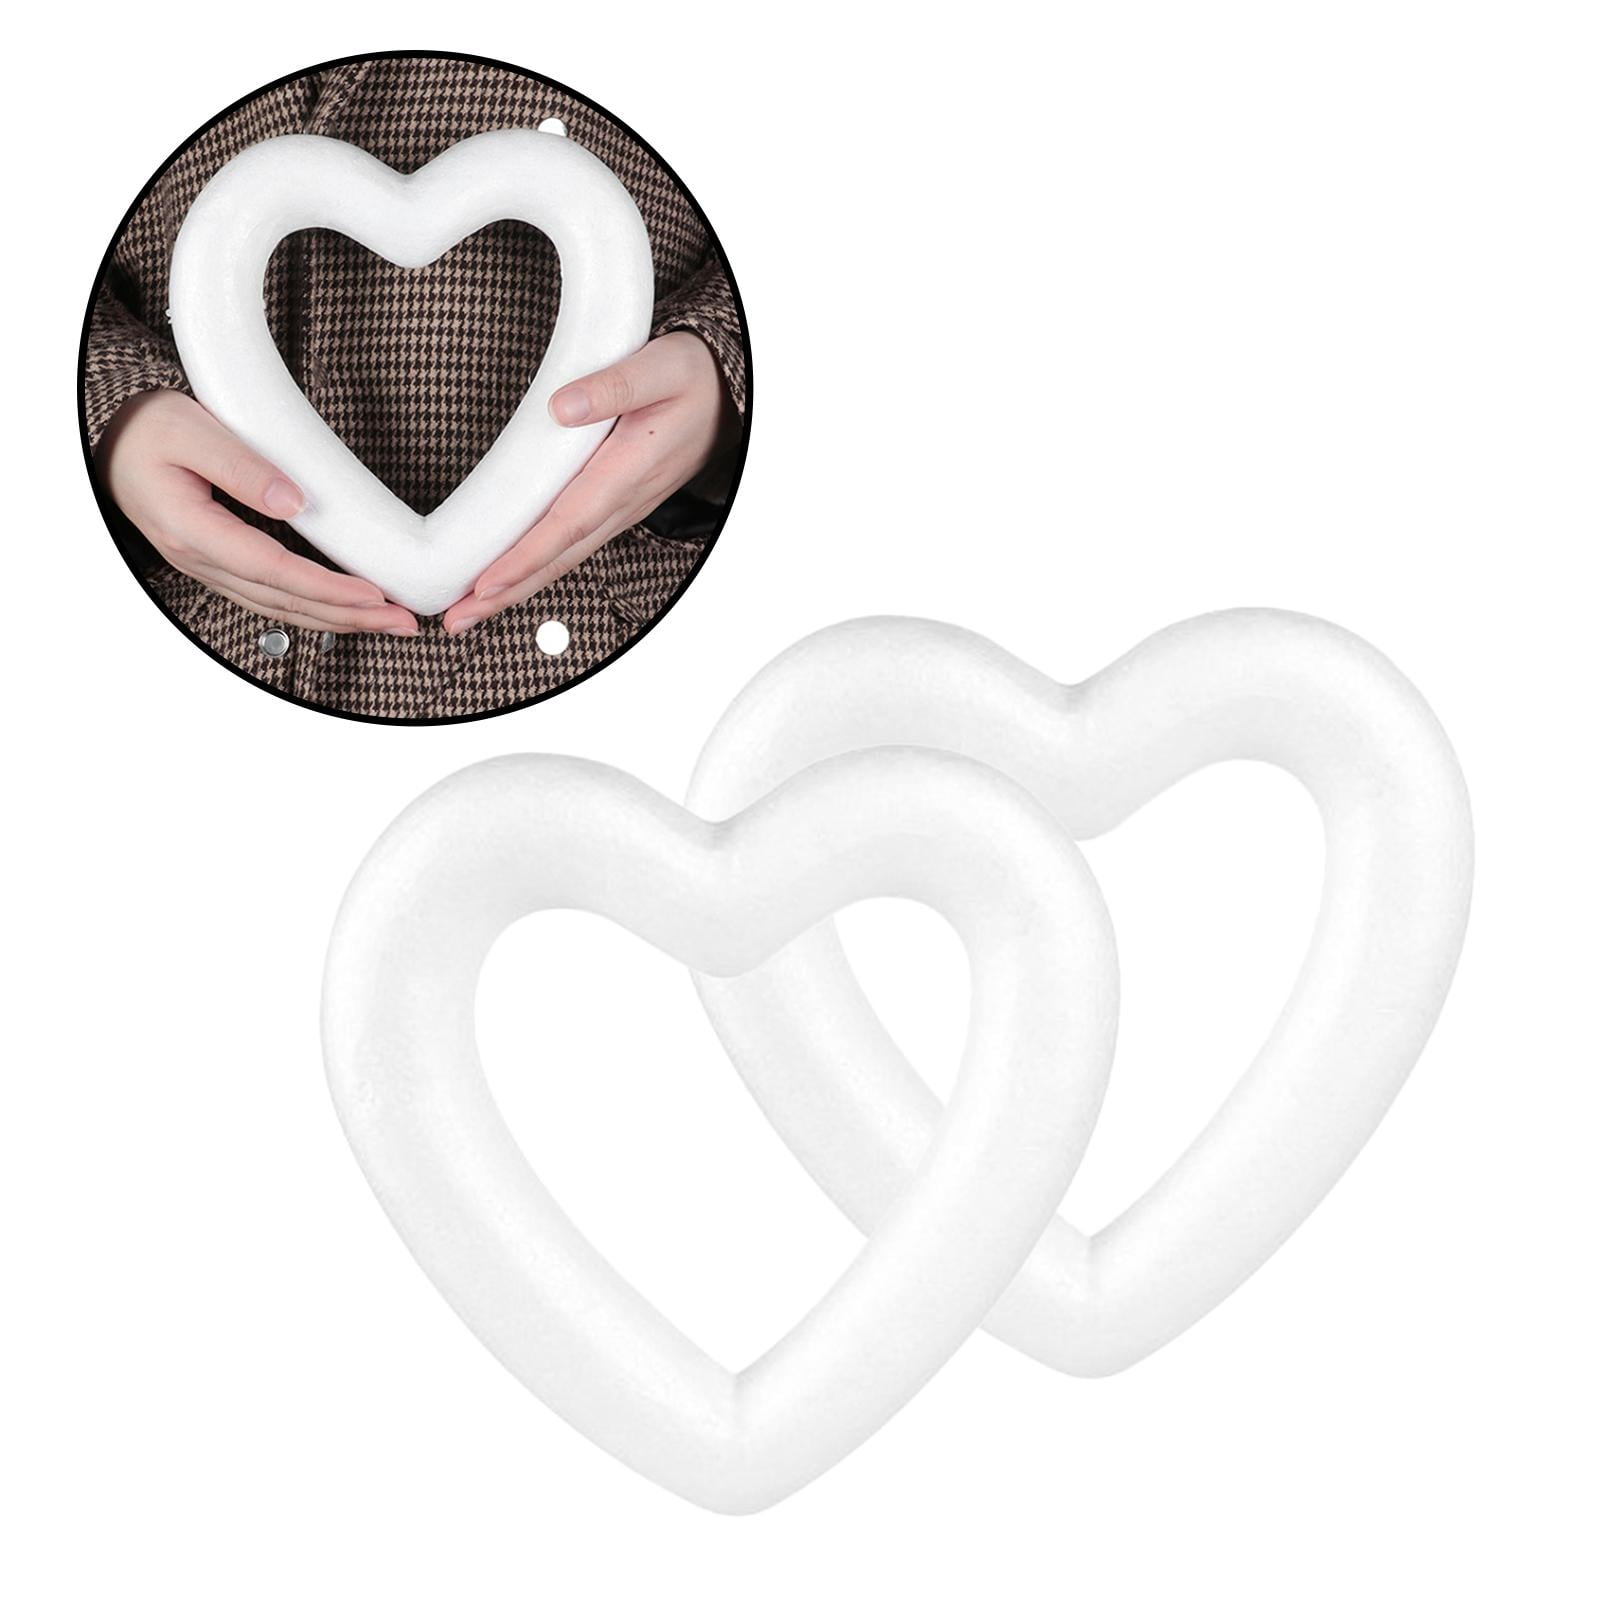 Foam Hearts - Hollow Shapes Wreath Crafts Ball Love Shaped, Customize w/  Flowers, Paint, Rope, Twine, Ribbon,, Embellishments - 2PCS/20CM 